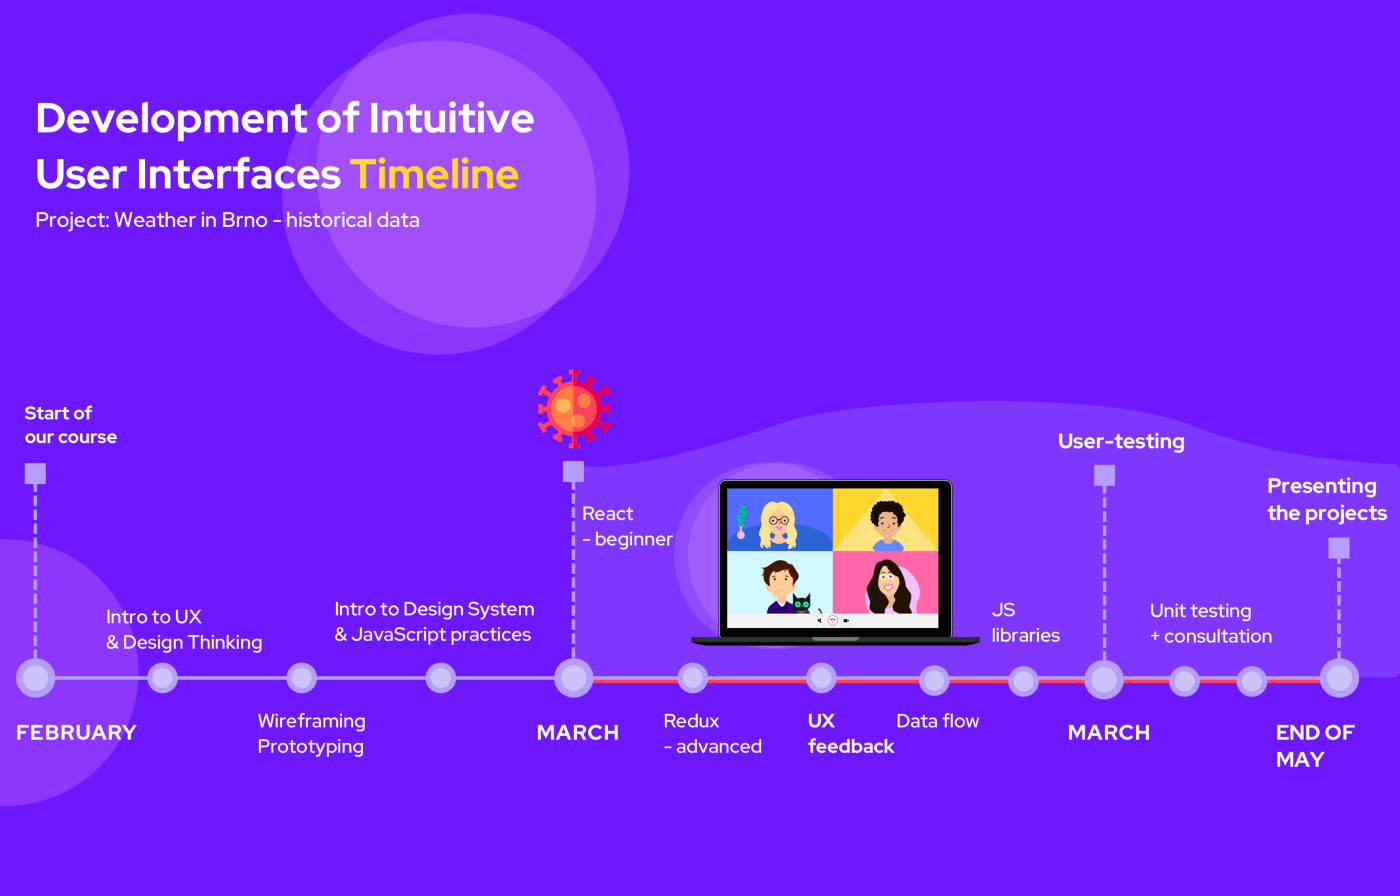 Illustration describing the Timeline of the UX/UI course